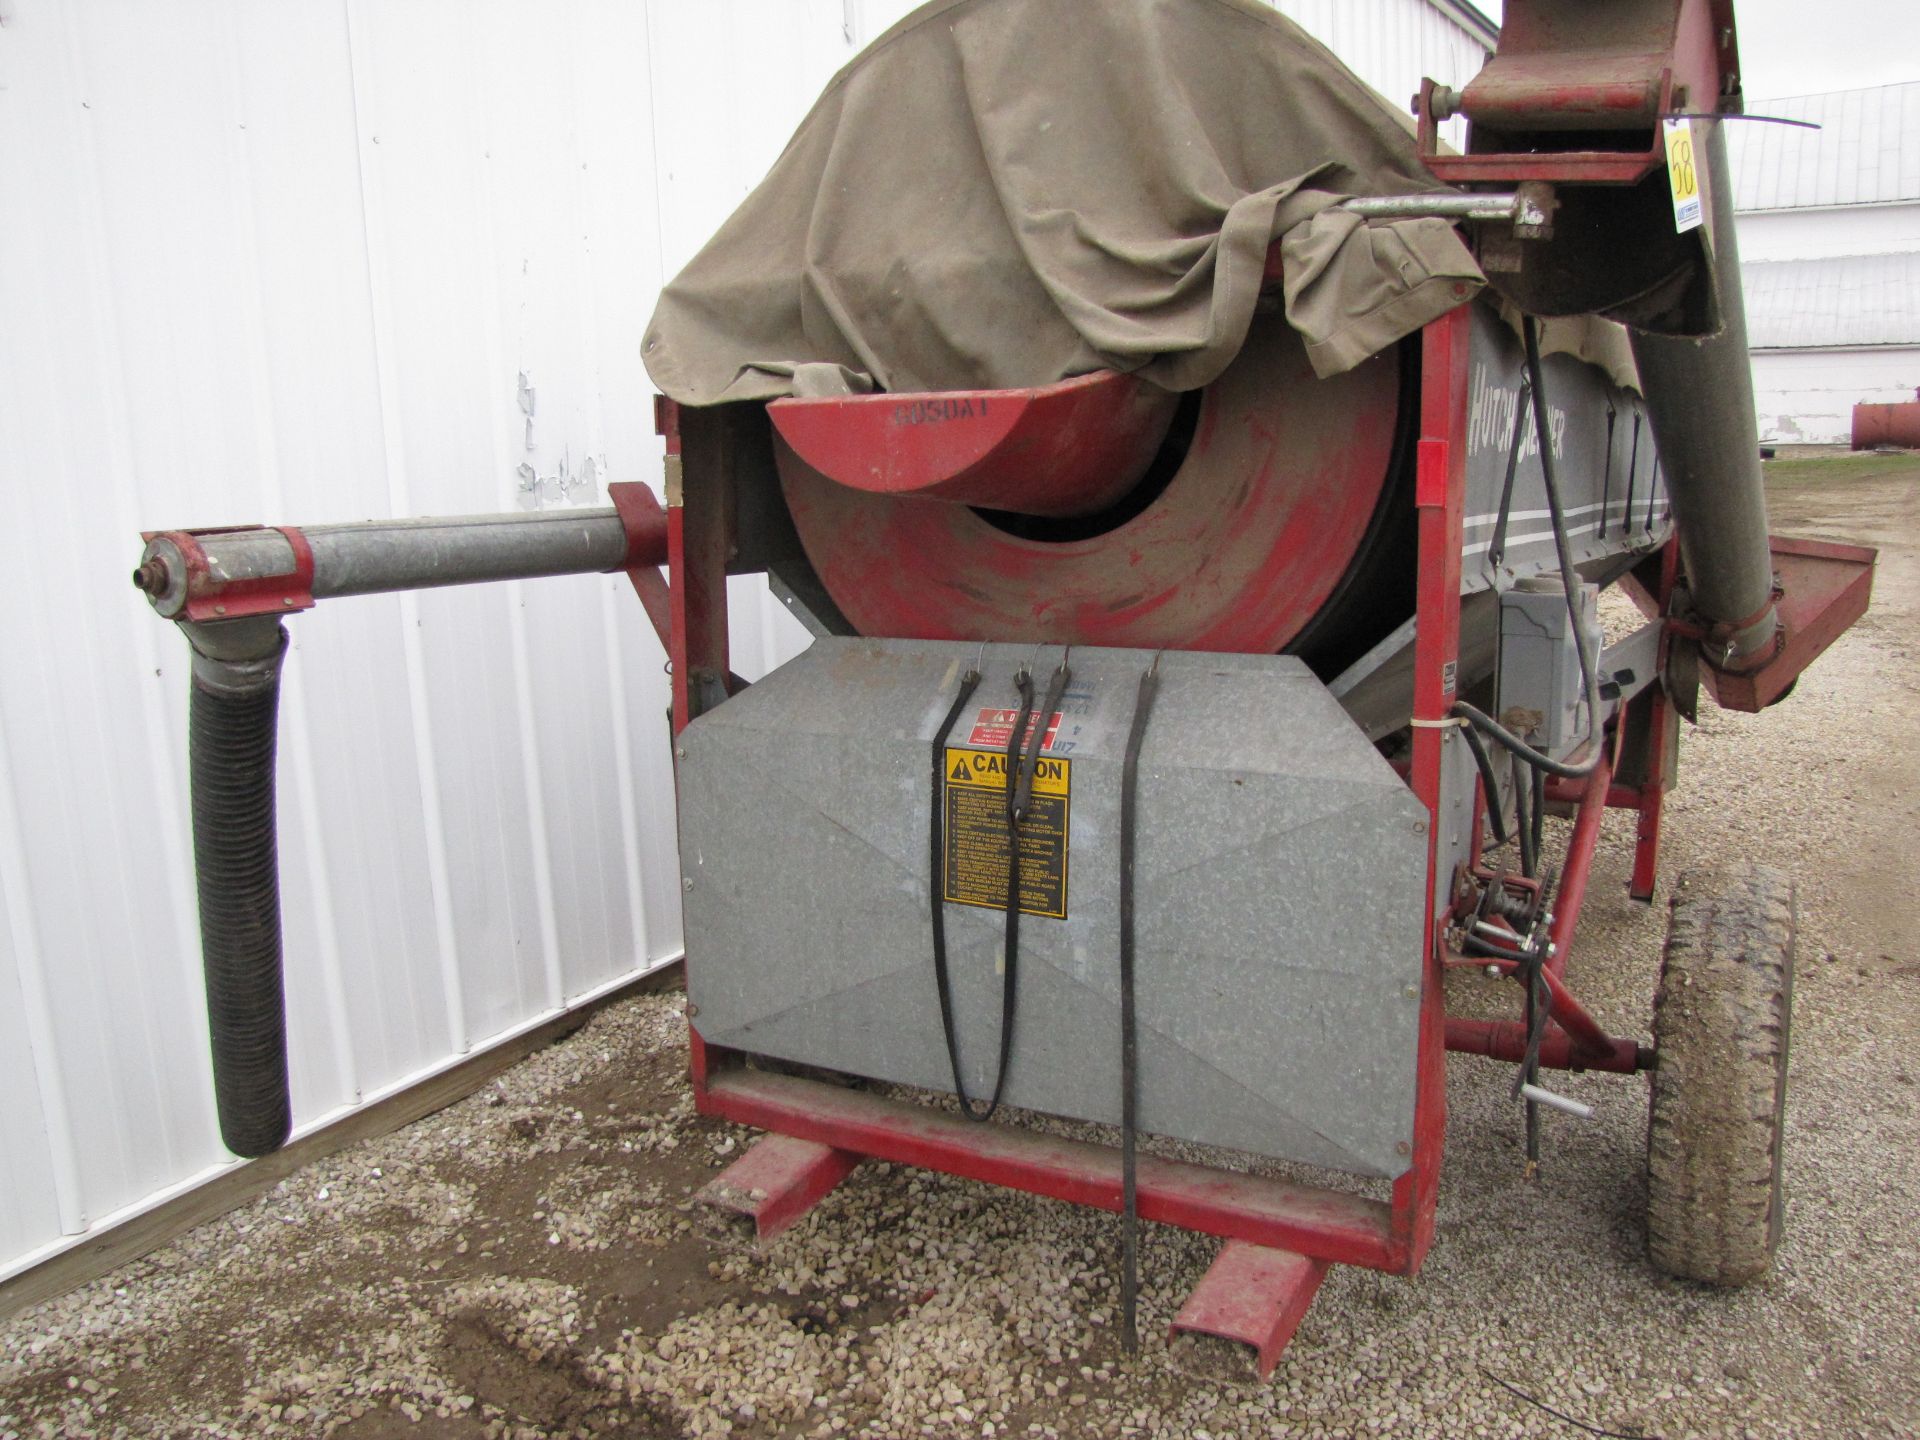 Hutch Cleaner C-1600 Grain Cleaner - Image 21 of 27